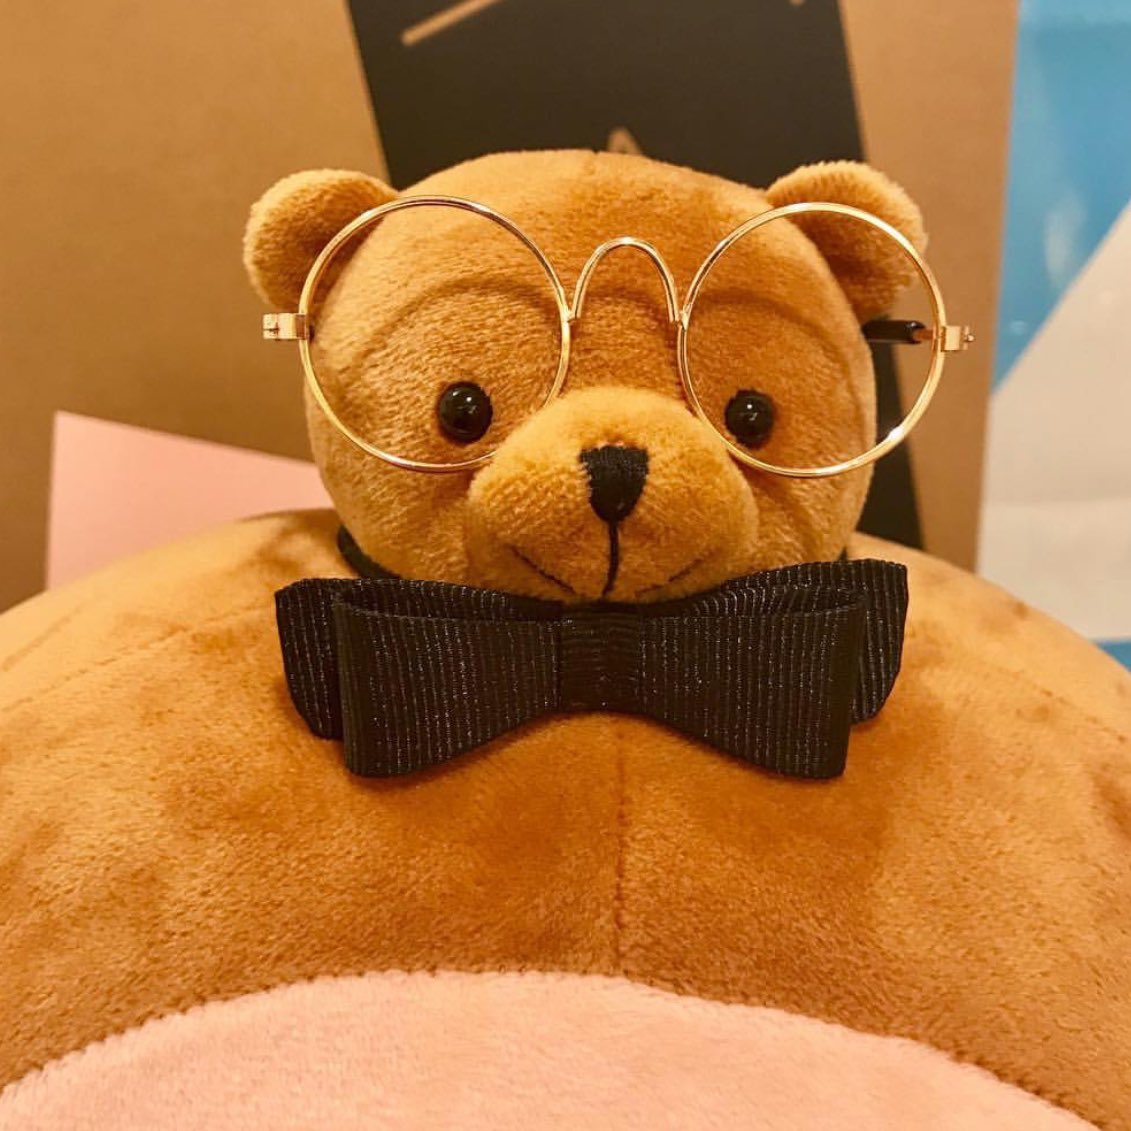 Do these glasses make Pip look smarter? She doesn’t need them, bears have excellent vision. 

And obviously exquisite taste in neckwear.  

Thank you to @tinyheaded_yung for this shot of Pip looking spiffy. #bowtie #glasses #PipTheBear #THK #tinyheadsbighearts #plush #toys